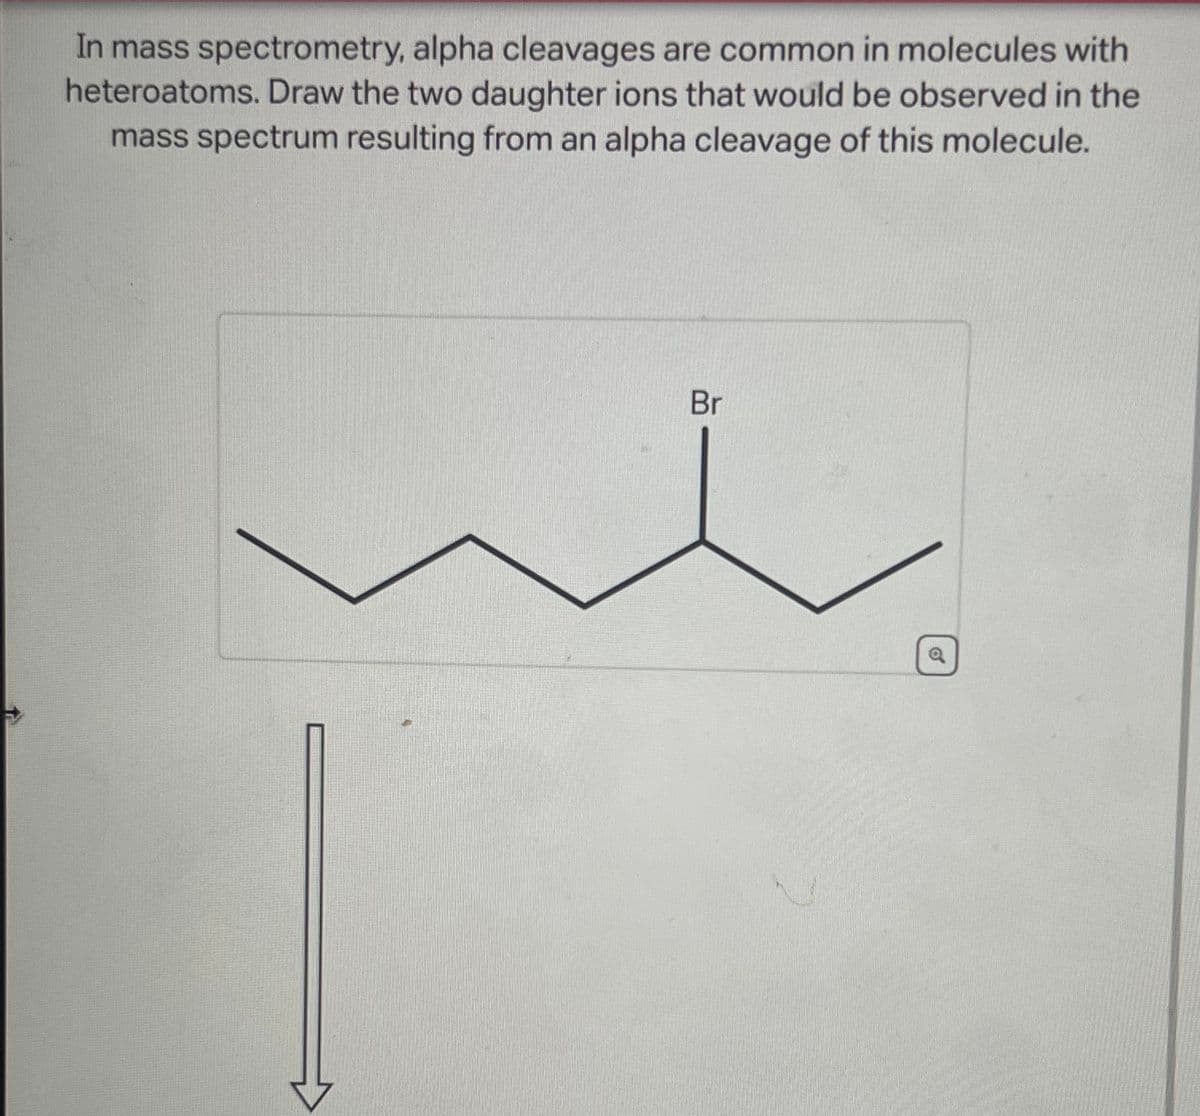 In mass spectrometry, alpha cleavages are common in molecules with
heteroatoms. Draw the two daughter ions that would be observed in the
mass spectrum resulting from an alpha cleavage of this molecule.
Br
a